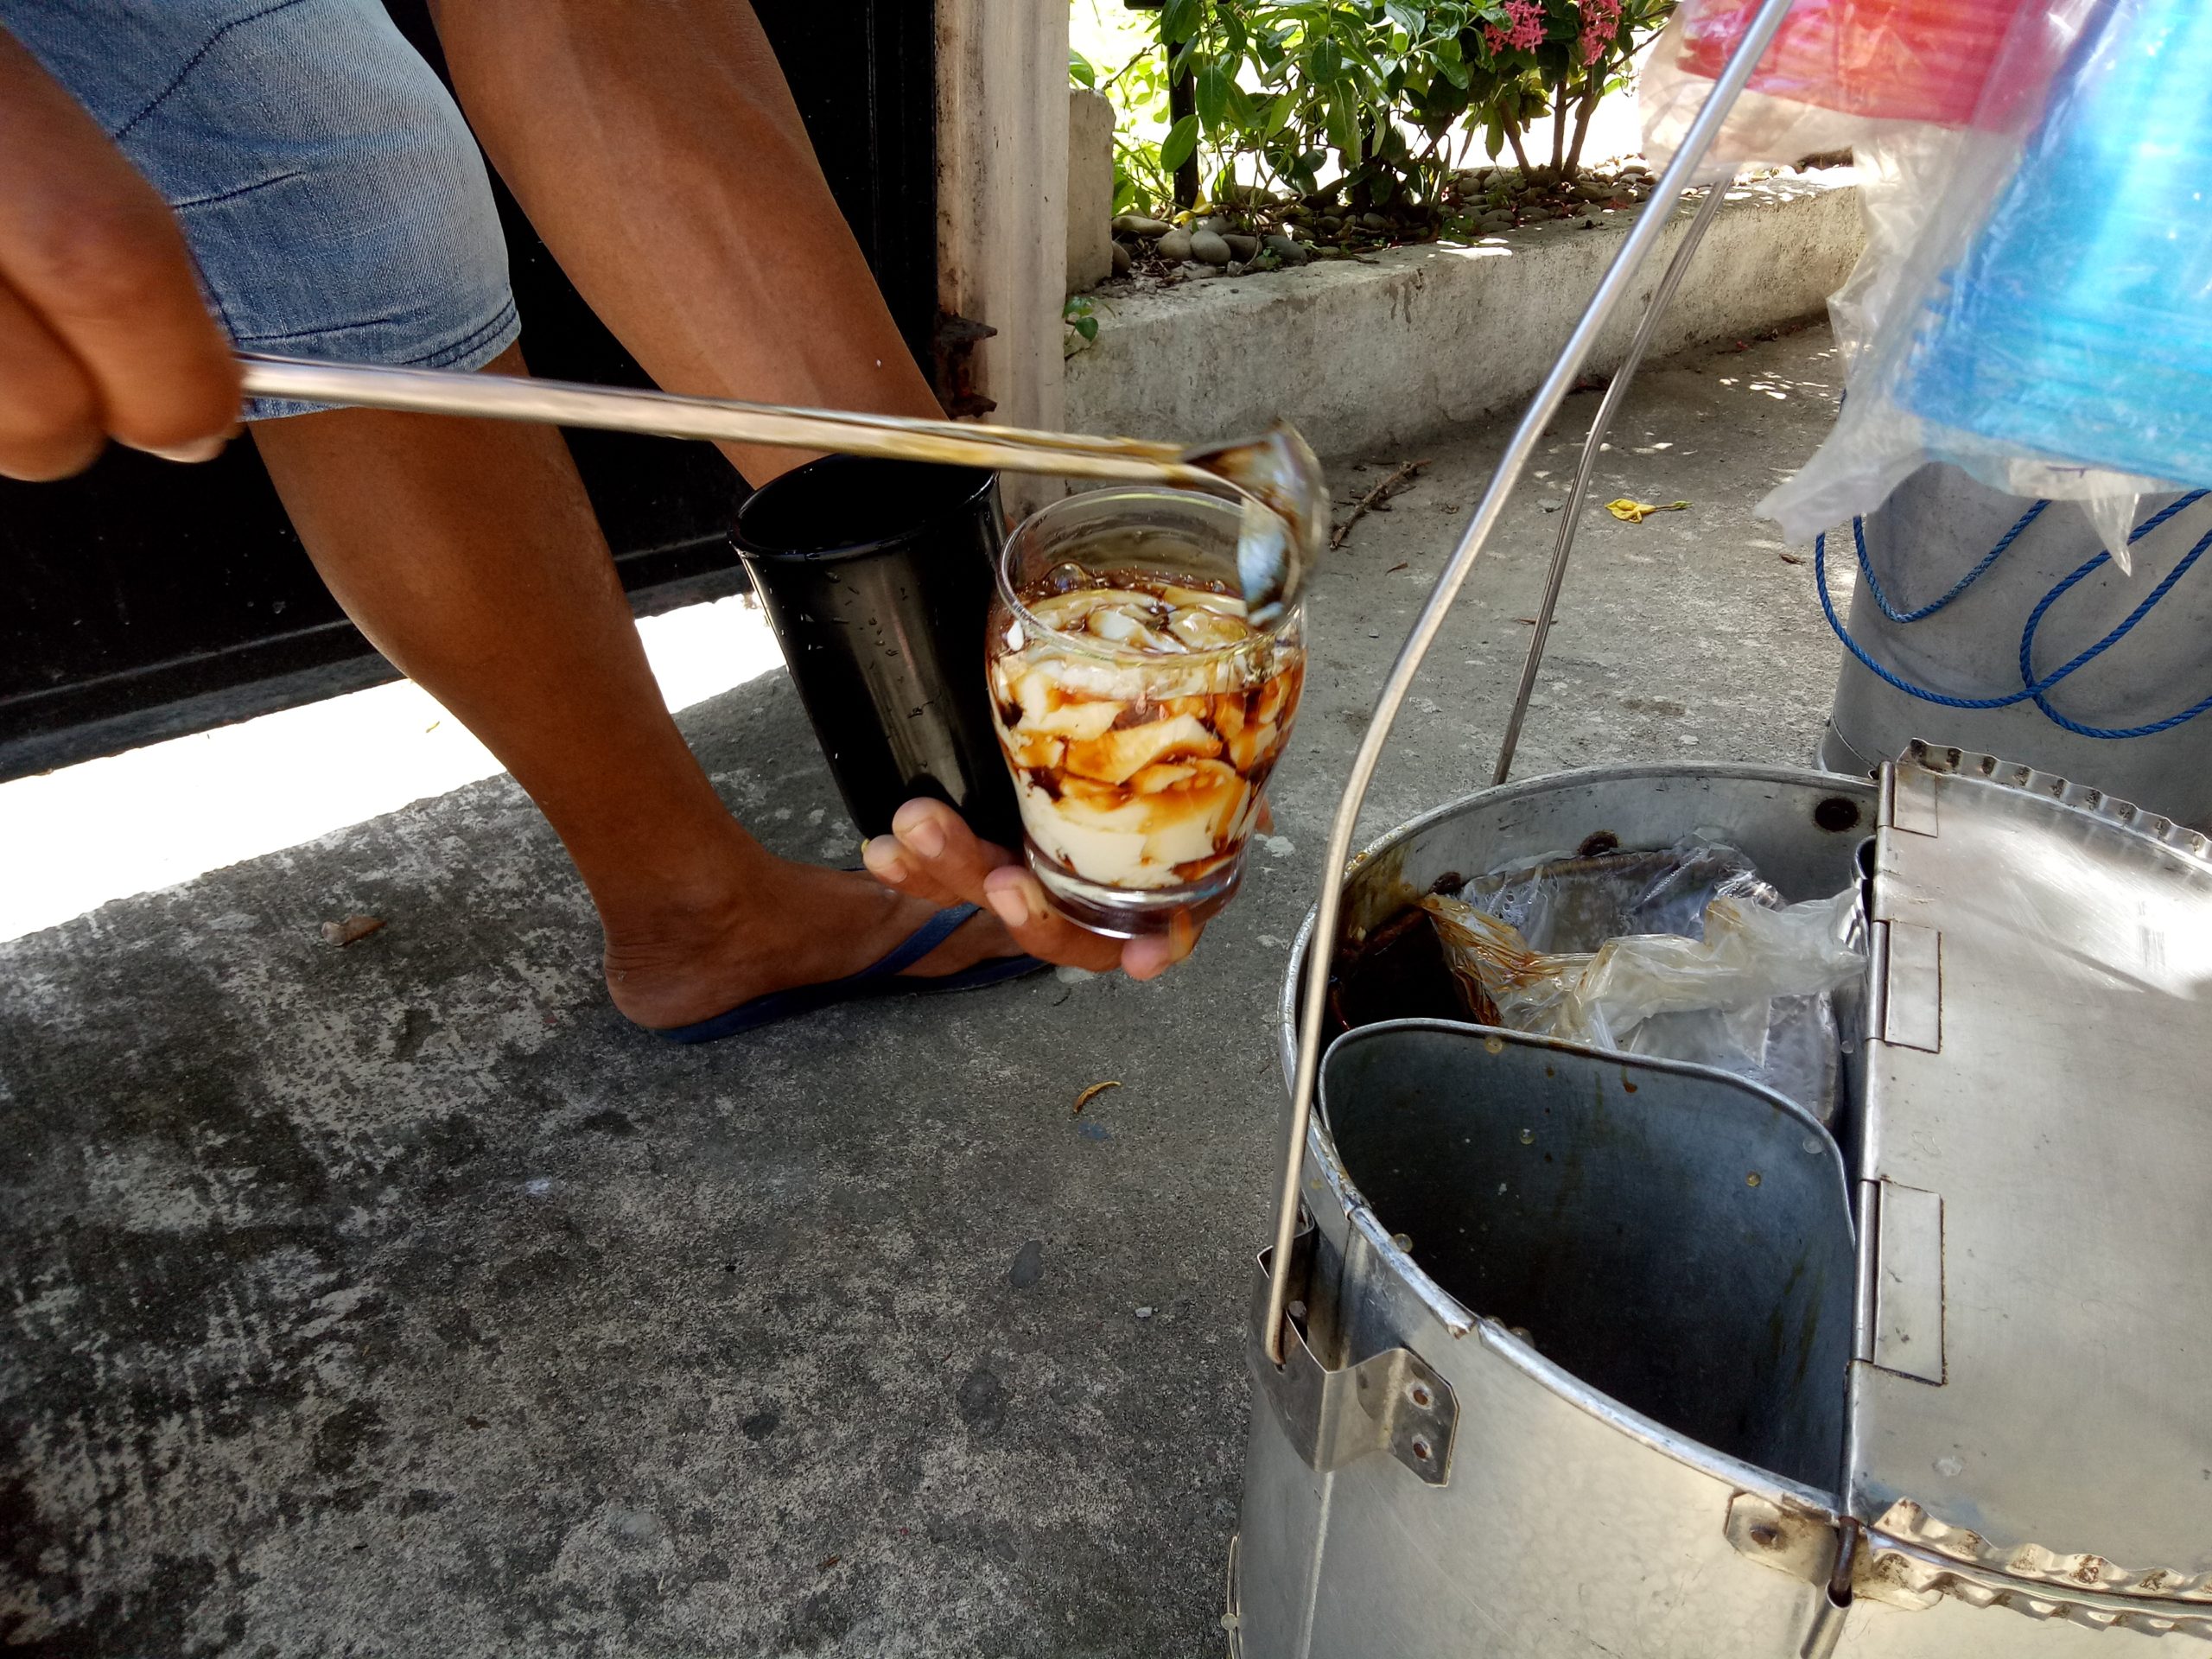  Taho is a popular street food in the Philippines